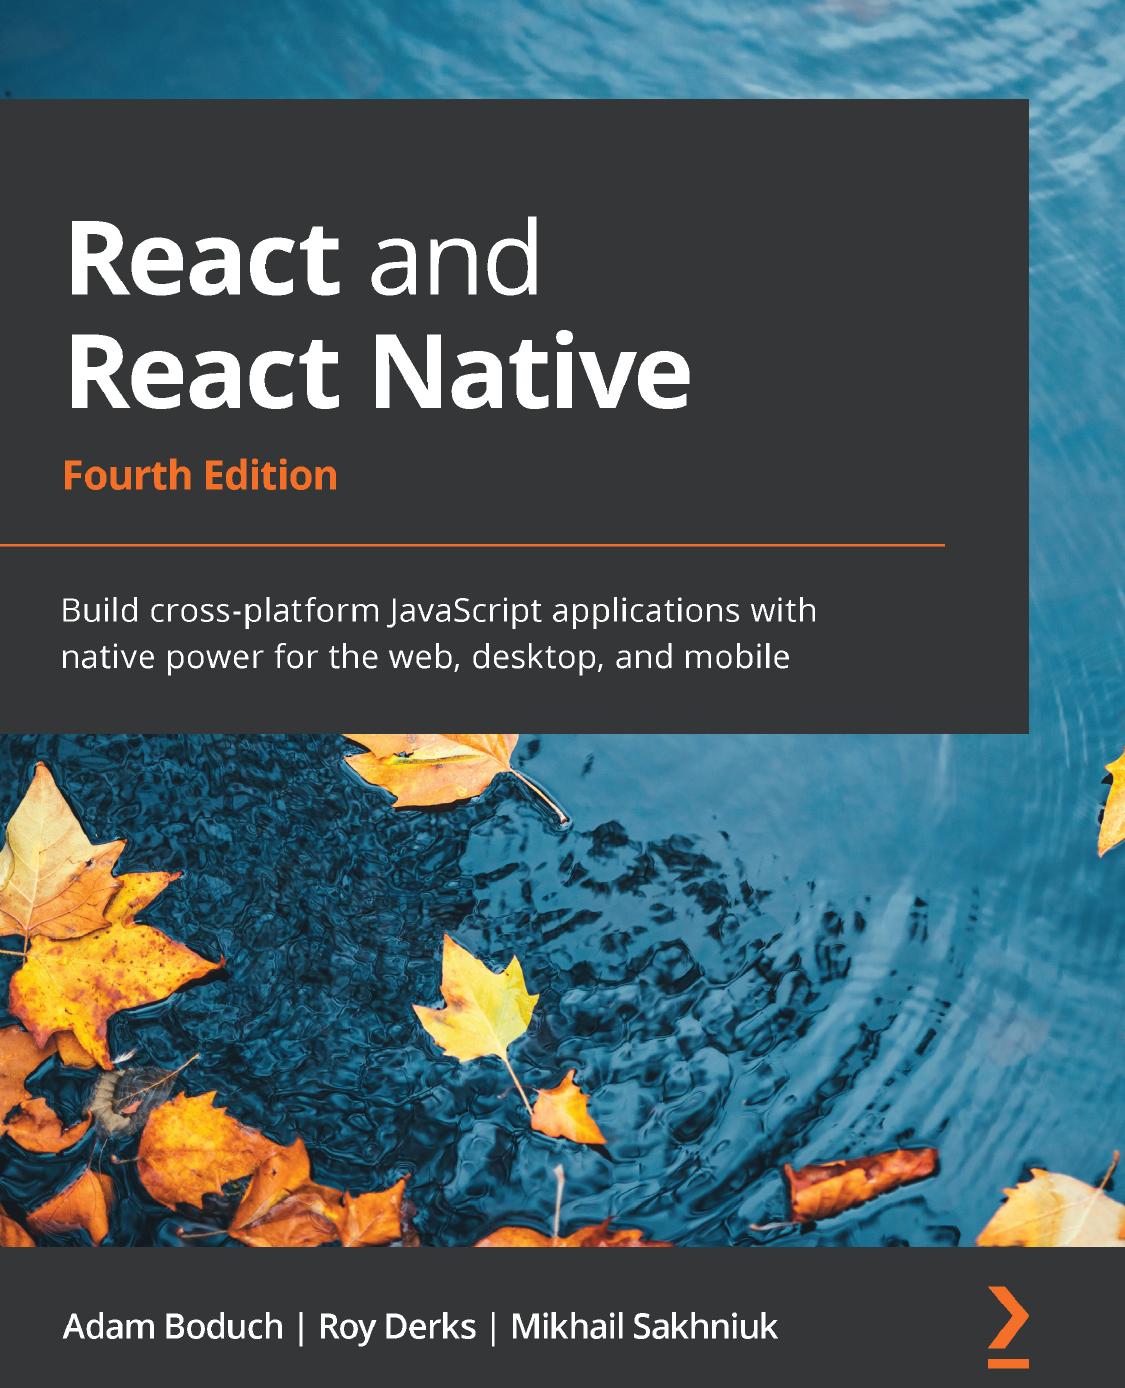 React and React Native: Build Cross-Platform JavaScript Applications With Native Power for the Web, Desktop, and Mobile - Fourth Edition